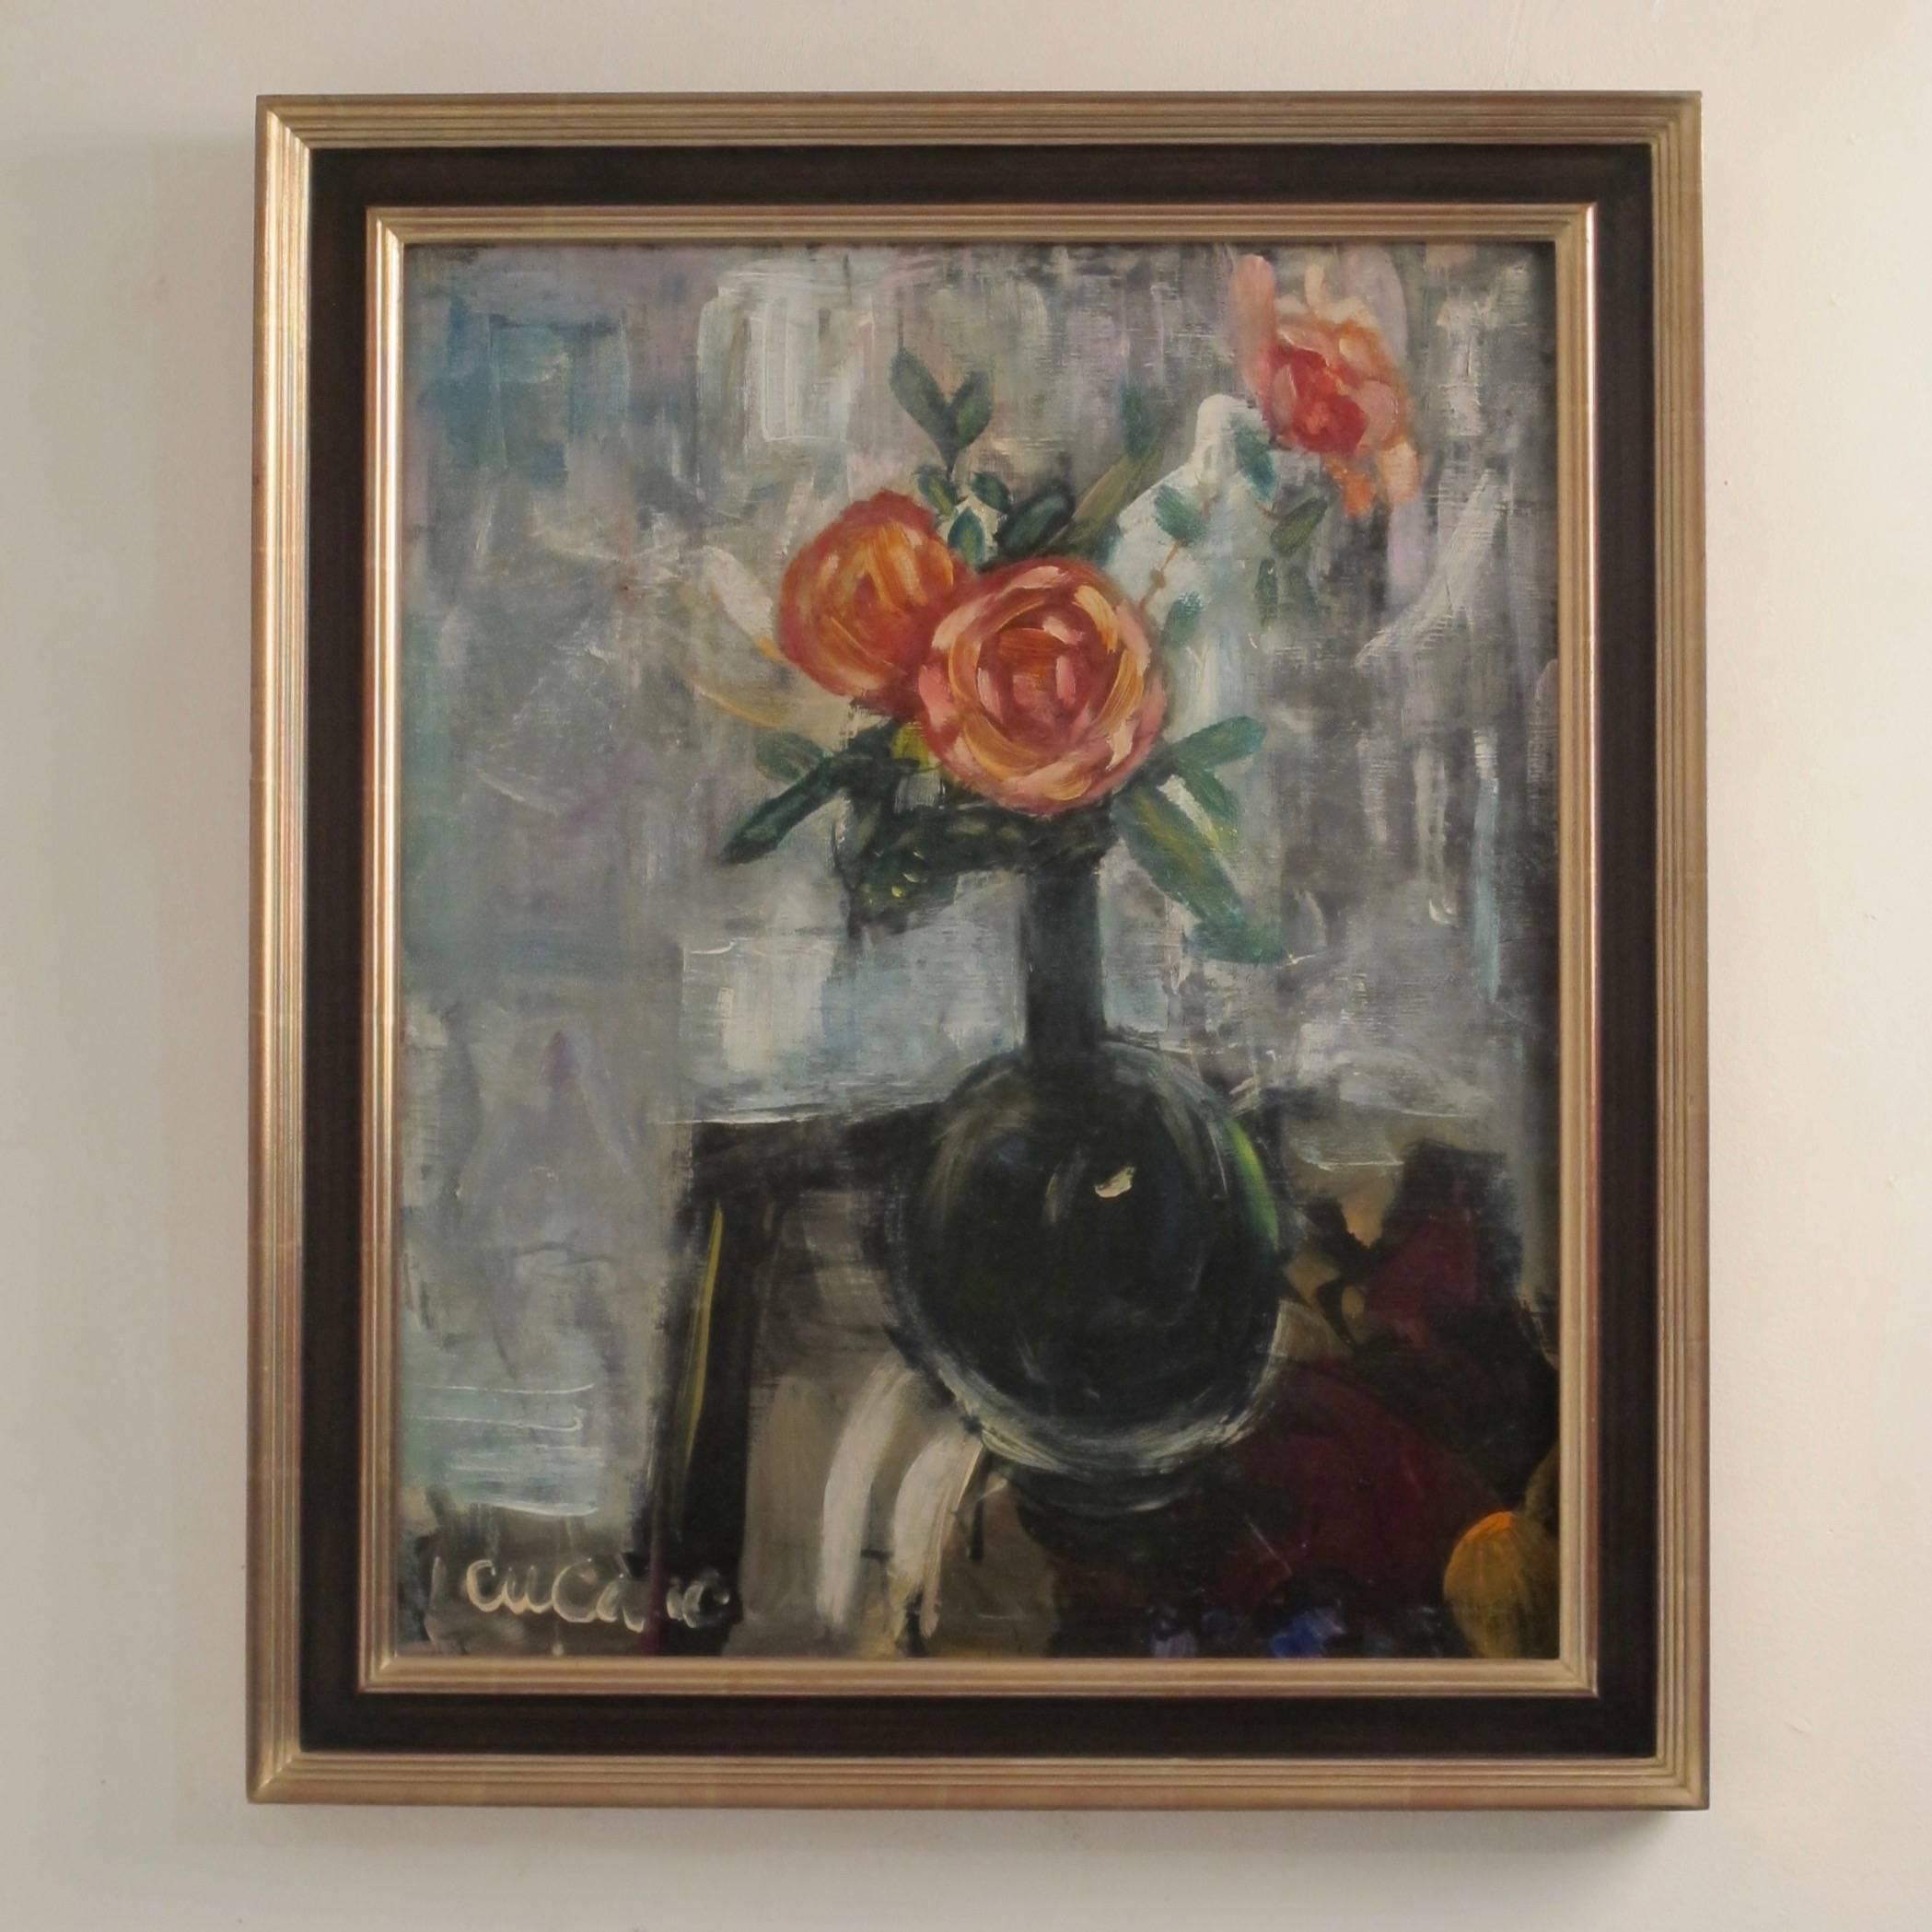 Mid-20th century still life painting by California Bay Area artist Pascal Cucaro (b.1915 - d. 2004). Oil on canvas in original painted wood frame. 

Pascal (Pat) Cucaro was born in Youngstown, Ohio on November 6, 1915, to Italian immigrant